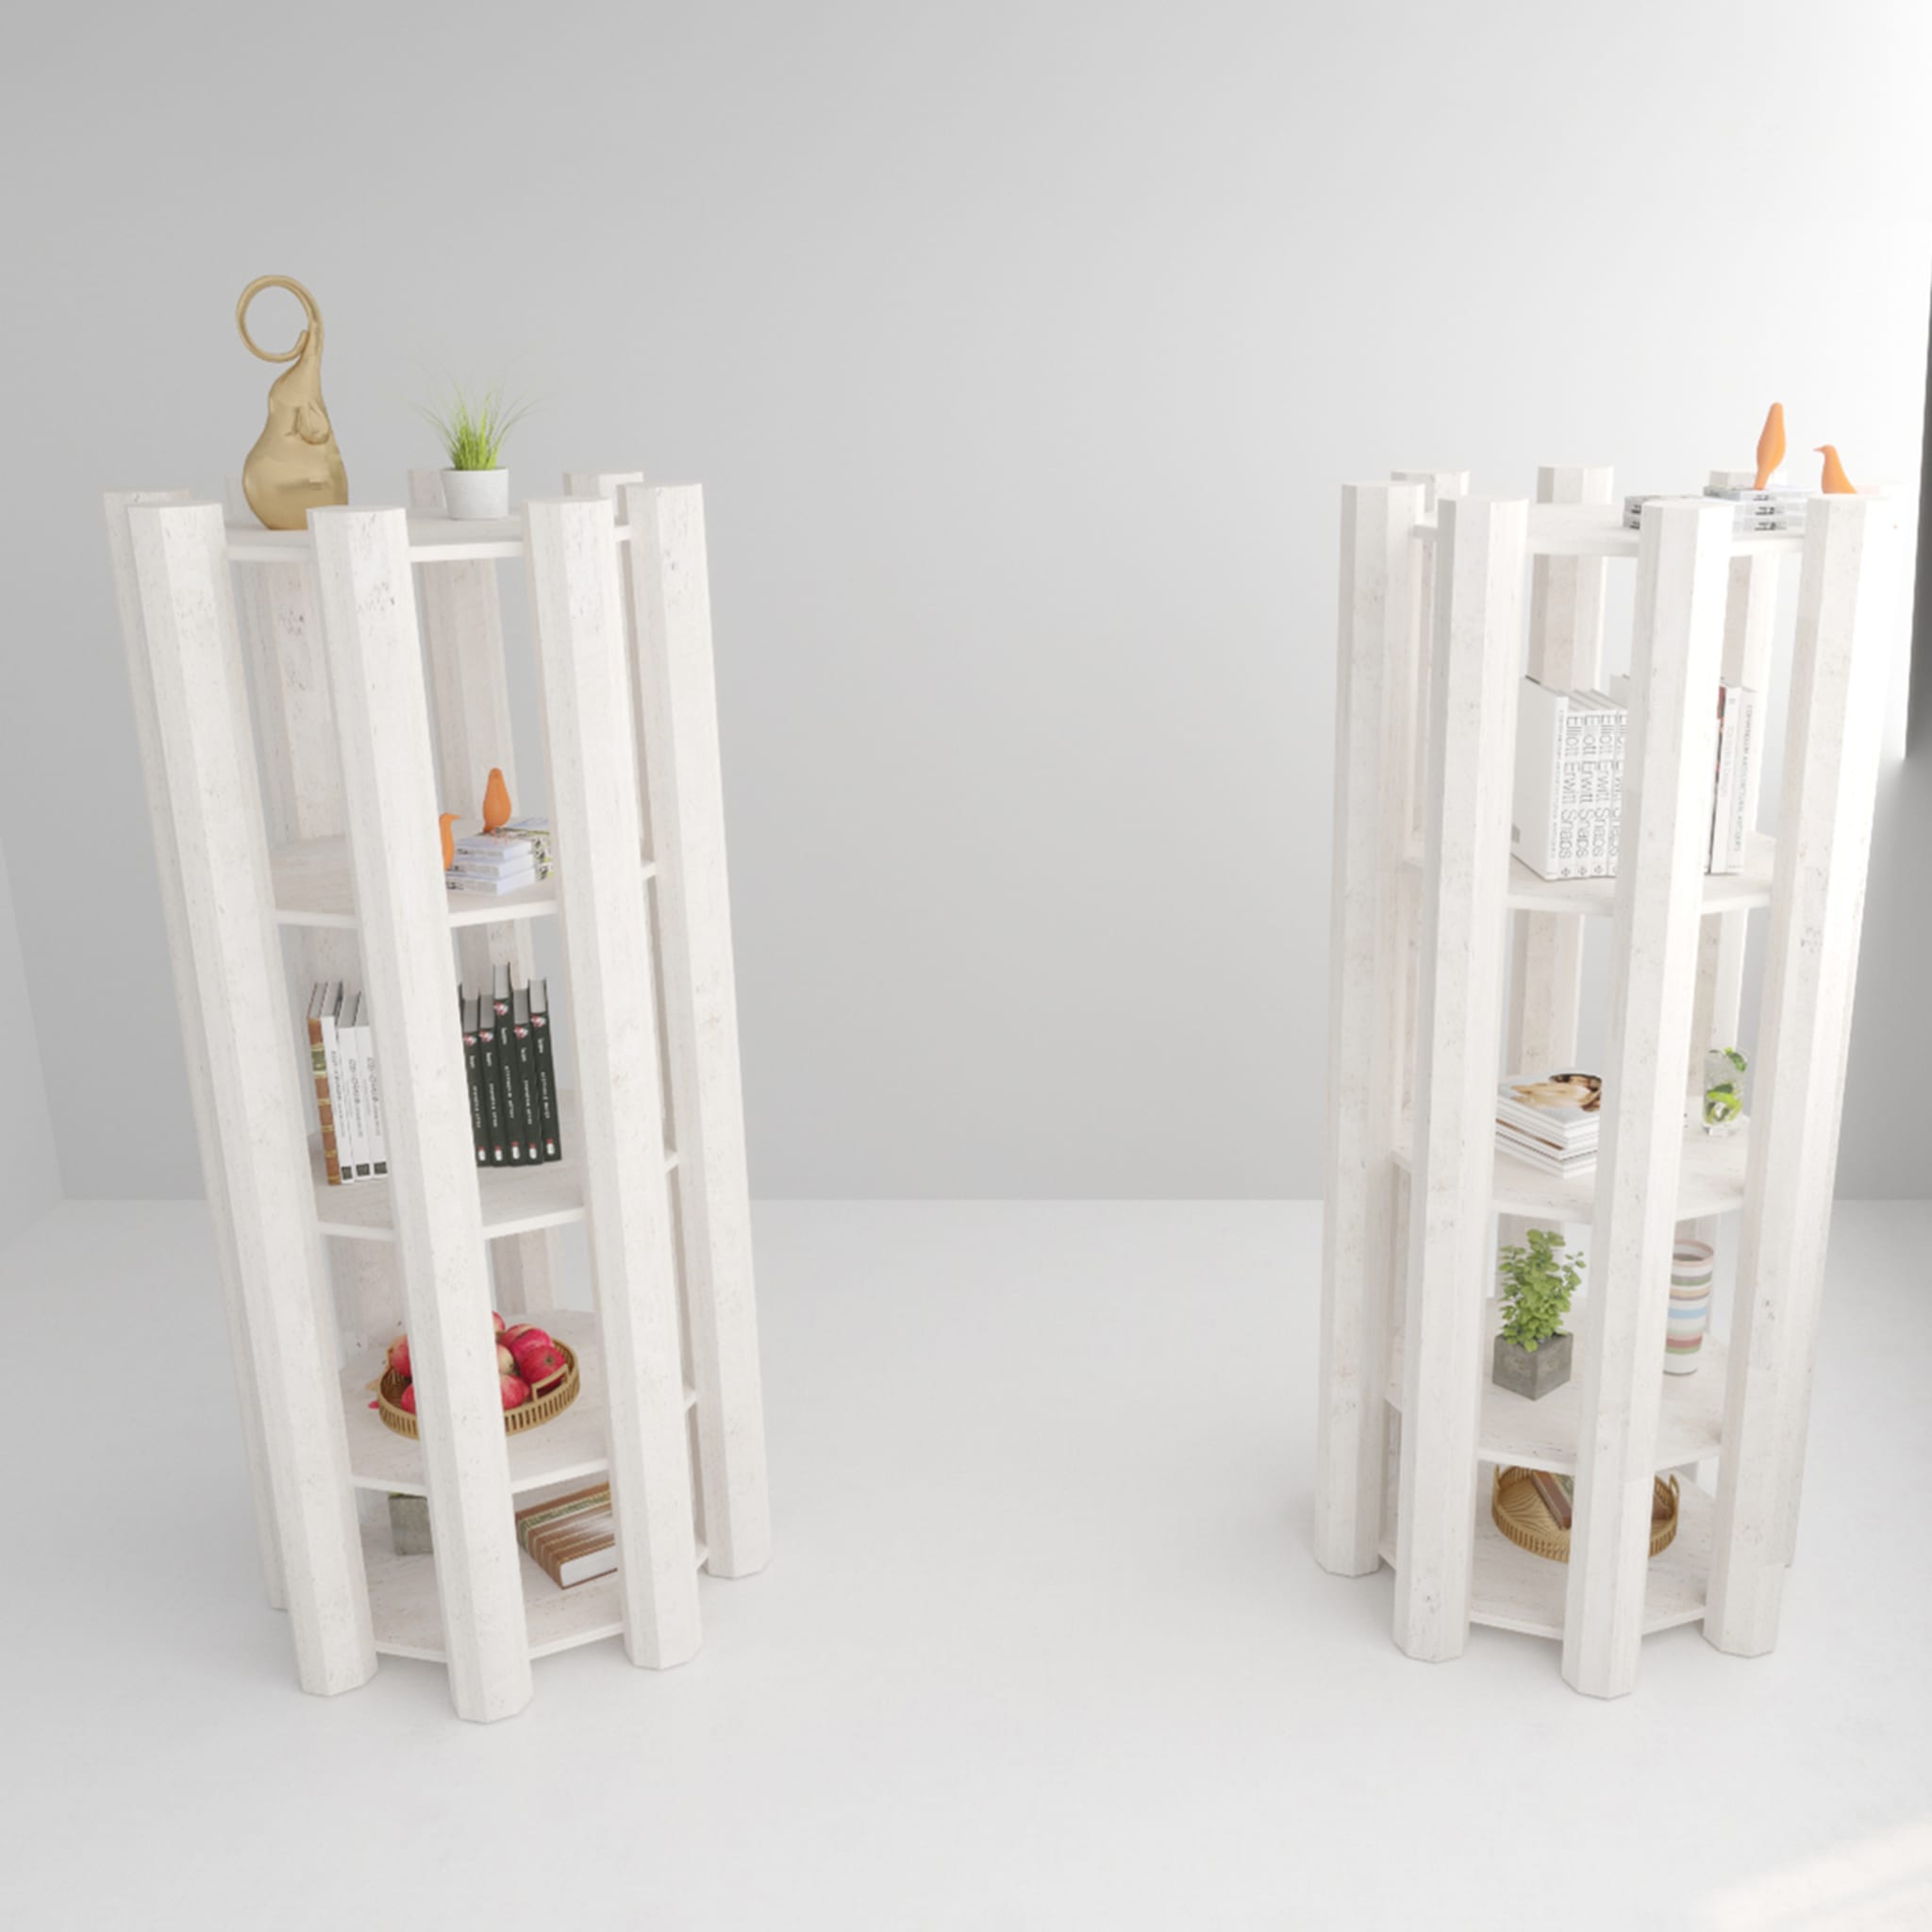 Federico Bookcase in White Marble By Sissy Daniele - Alternative view 1